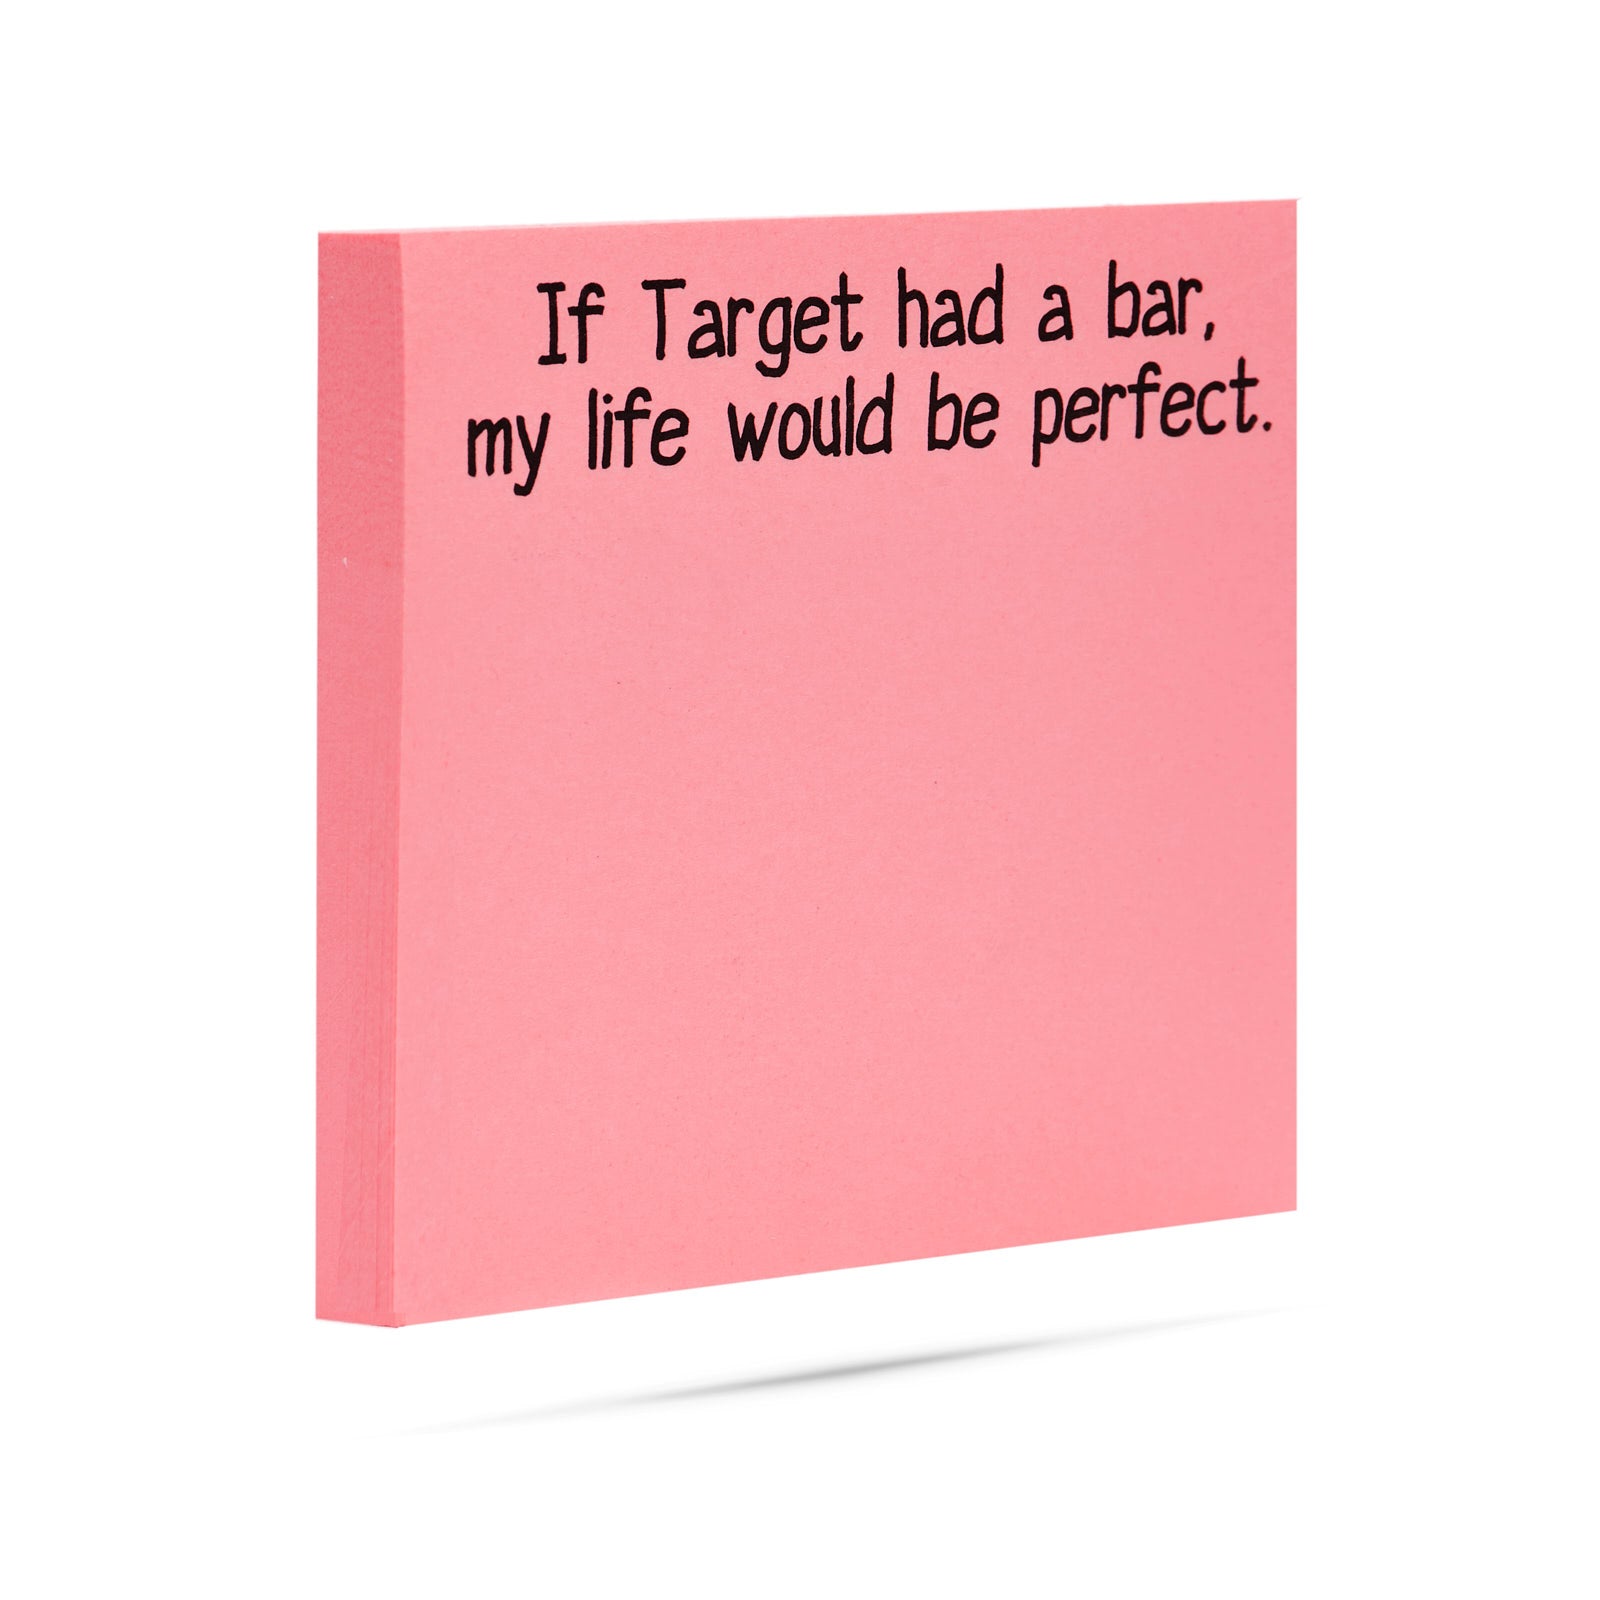 If Target had a bar, my life would be perfect 100 sheet sticky note pad